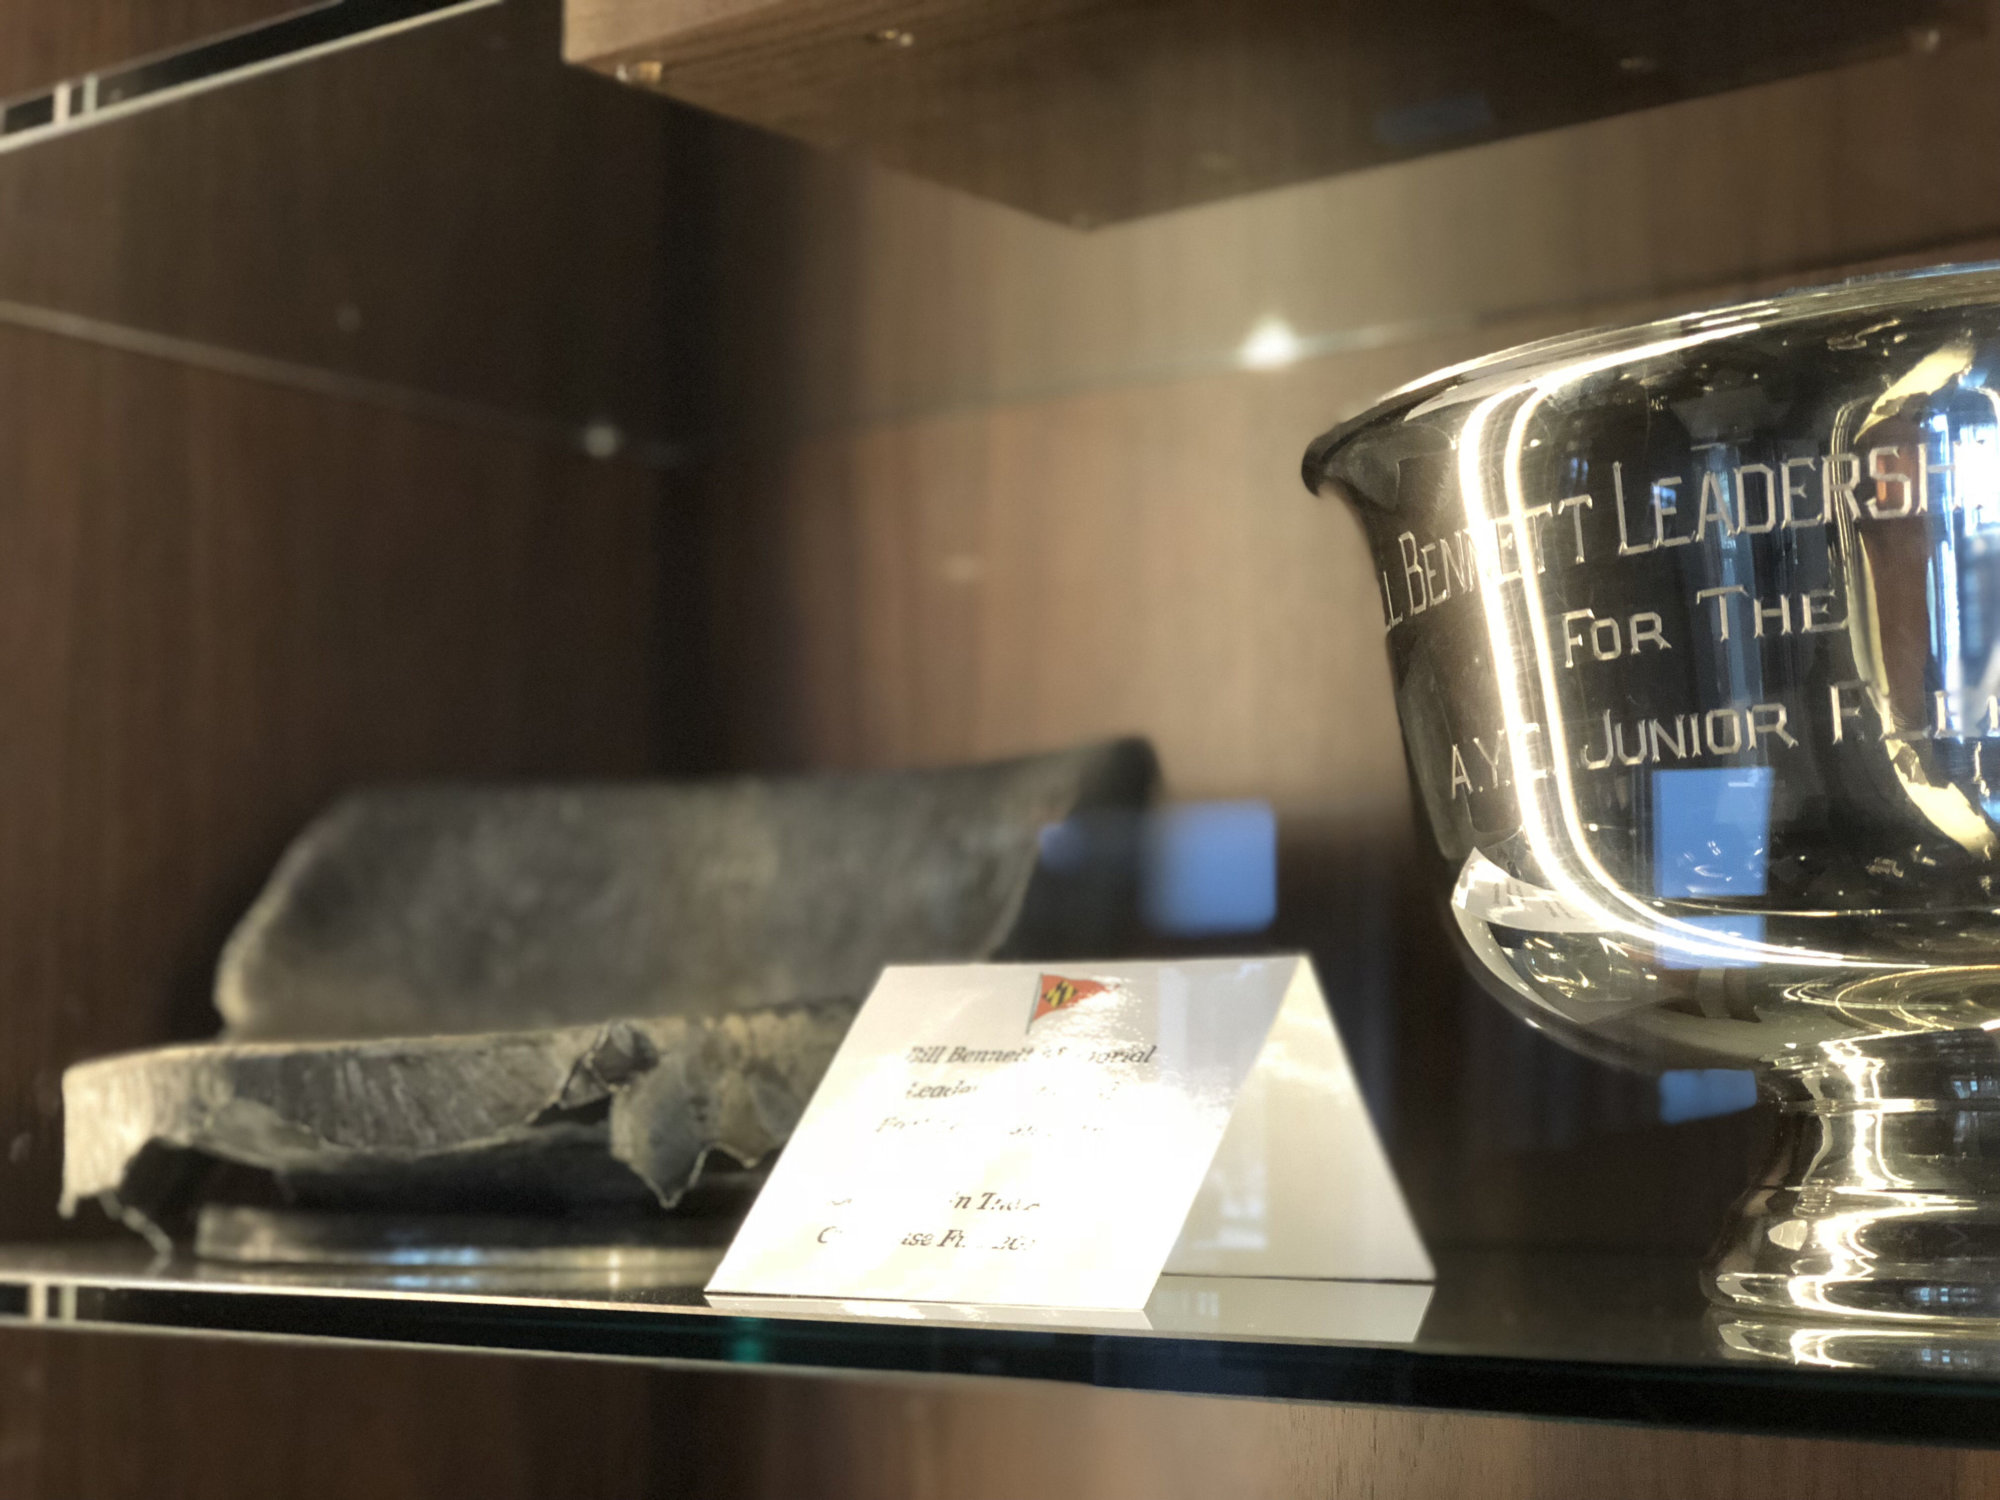 On the left is what’s left of the original Bill Bennett Leadership Award, presented to the Junior Fleet. It was destroyed in the 2015 Annapolis Yacht Club fire. You can see how it was melted down in the heat. On the right is the new version. (WTOP/Kate Ryan)